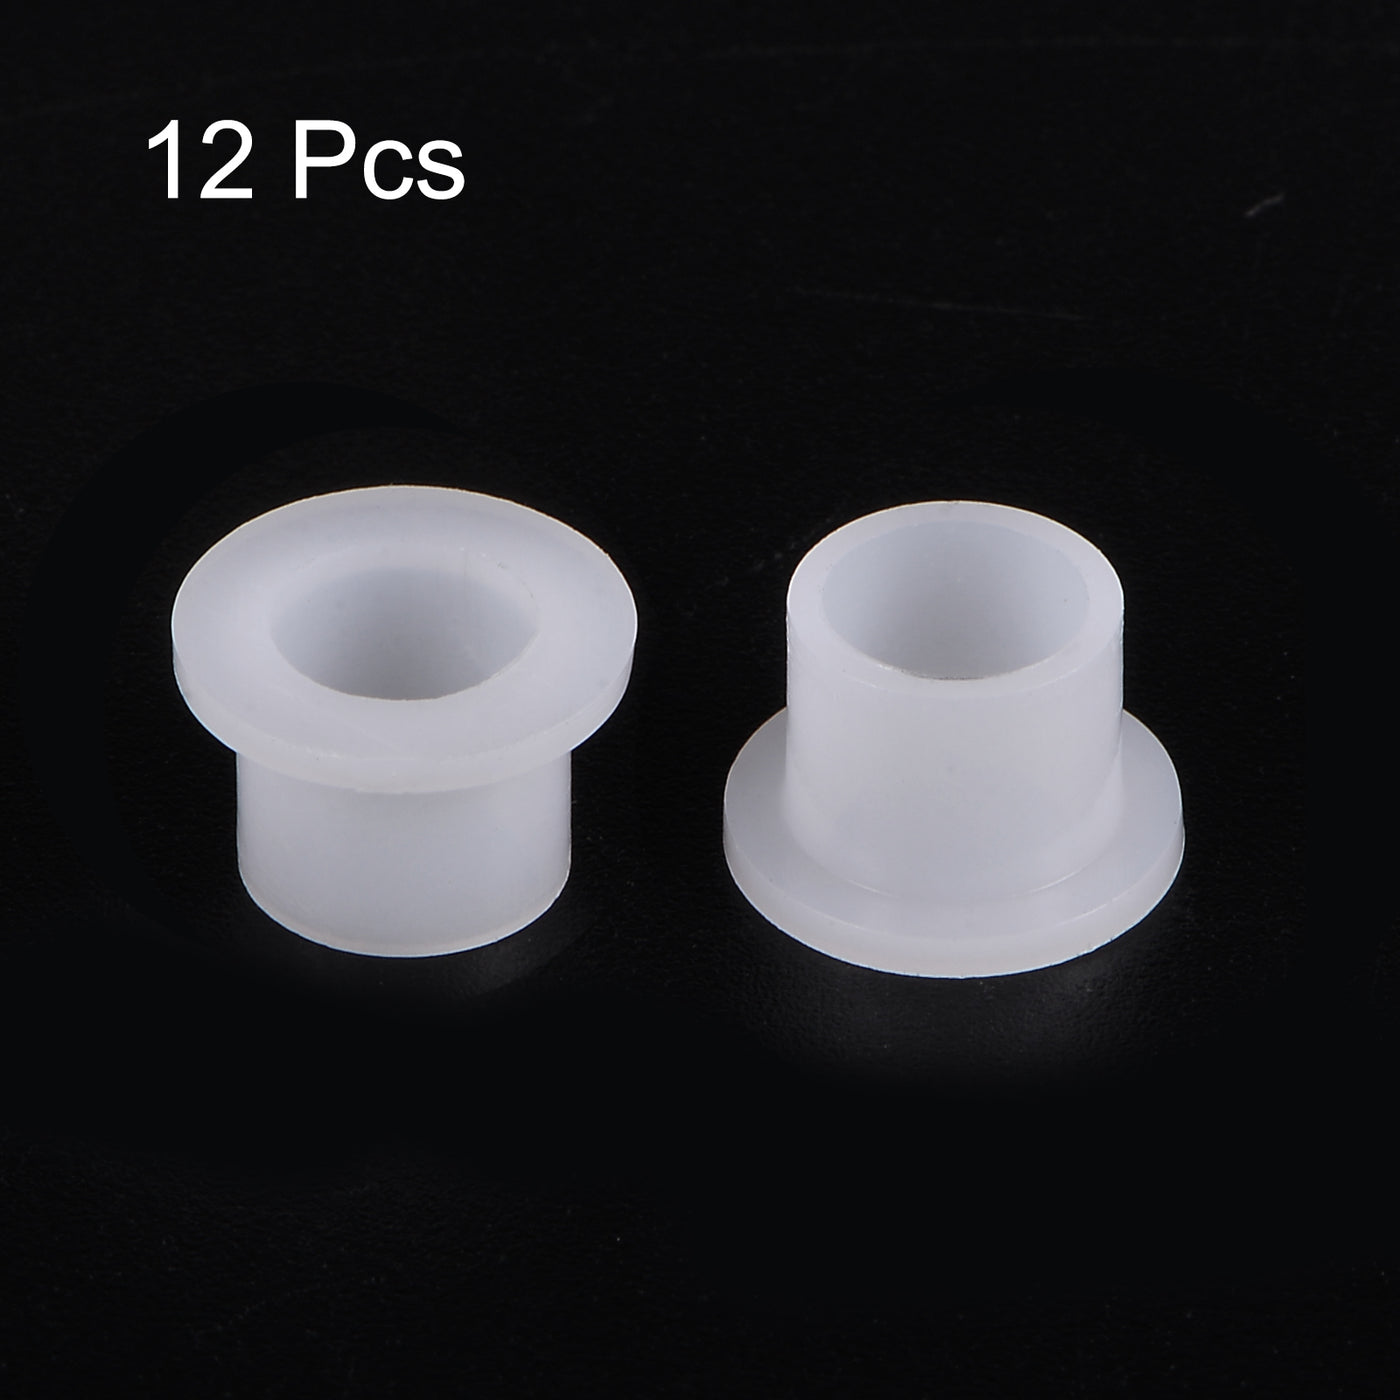 uxcell Uxcell 12pcs Flanged Sleeve Bearings 6.29mm ID 7.93mm OD 7.13mm L, Nylon Bushing White